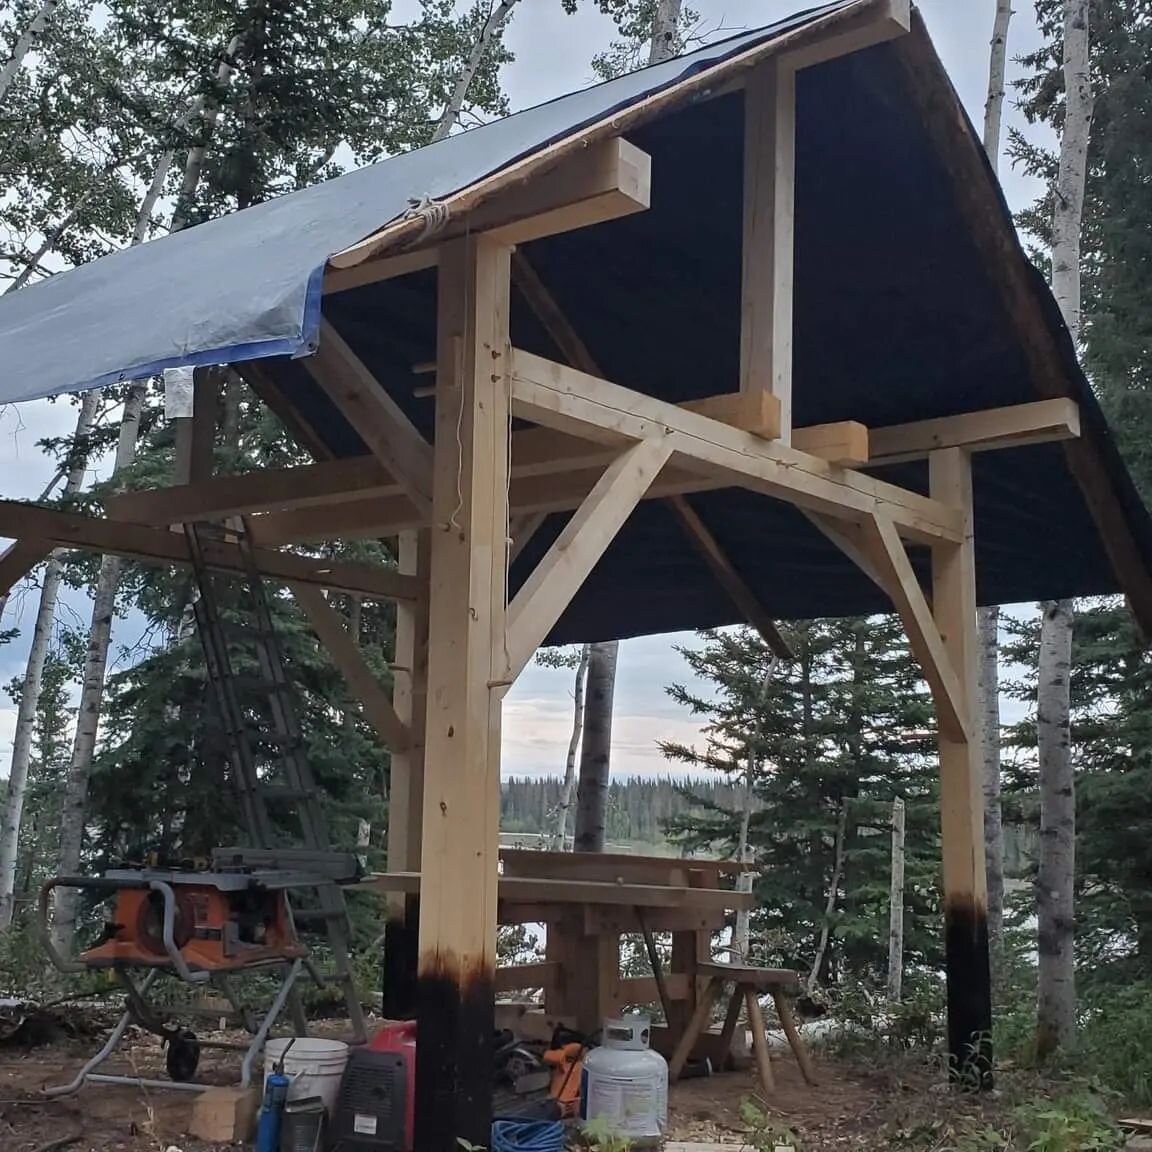 New smokehouse in the works- made from spruce we cut and milled into beams and Birch pegs.

#alaskahomestead #offgrid #timberframe #homesteadbuilding #building #smokehouse #bigenoughforamoose